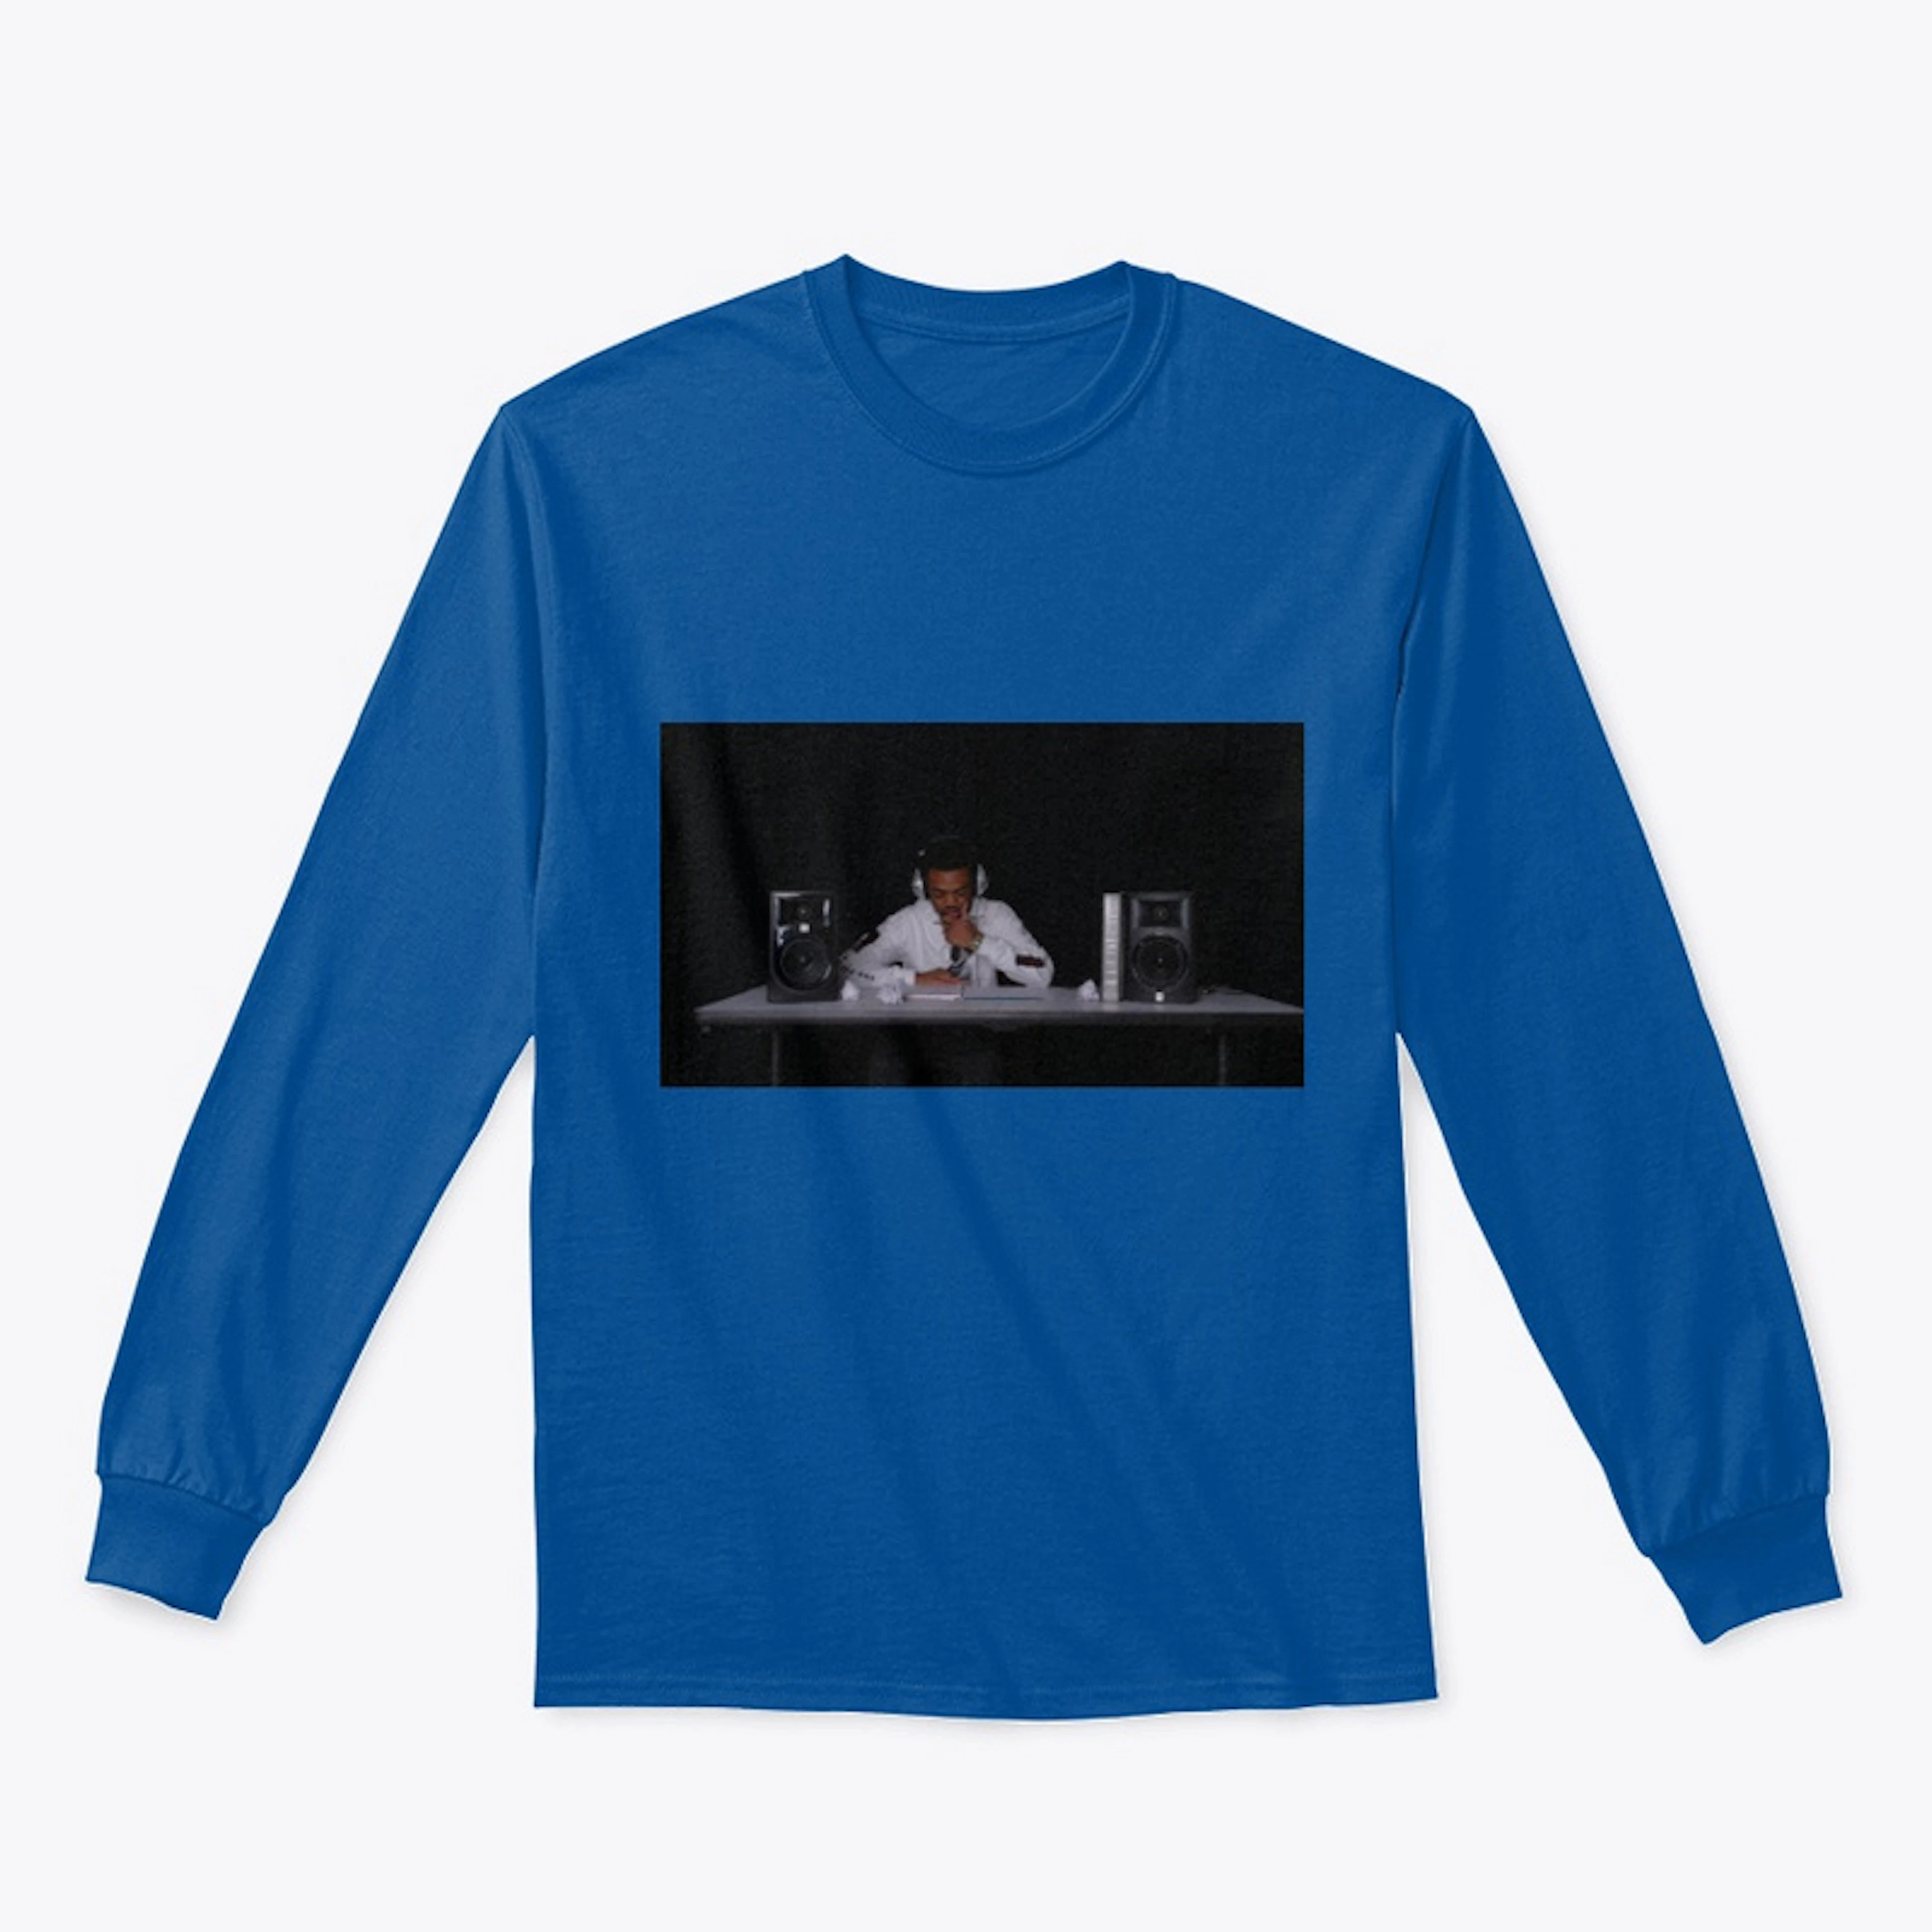 Something To Remember Cover art Long Tee